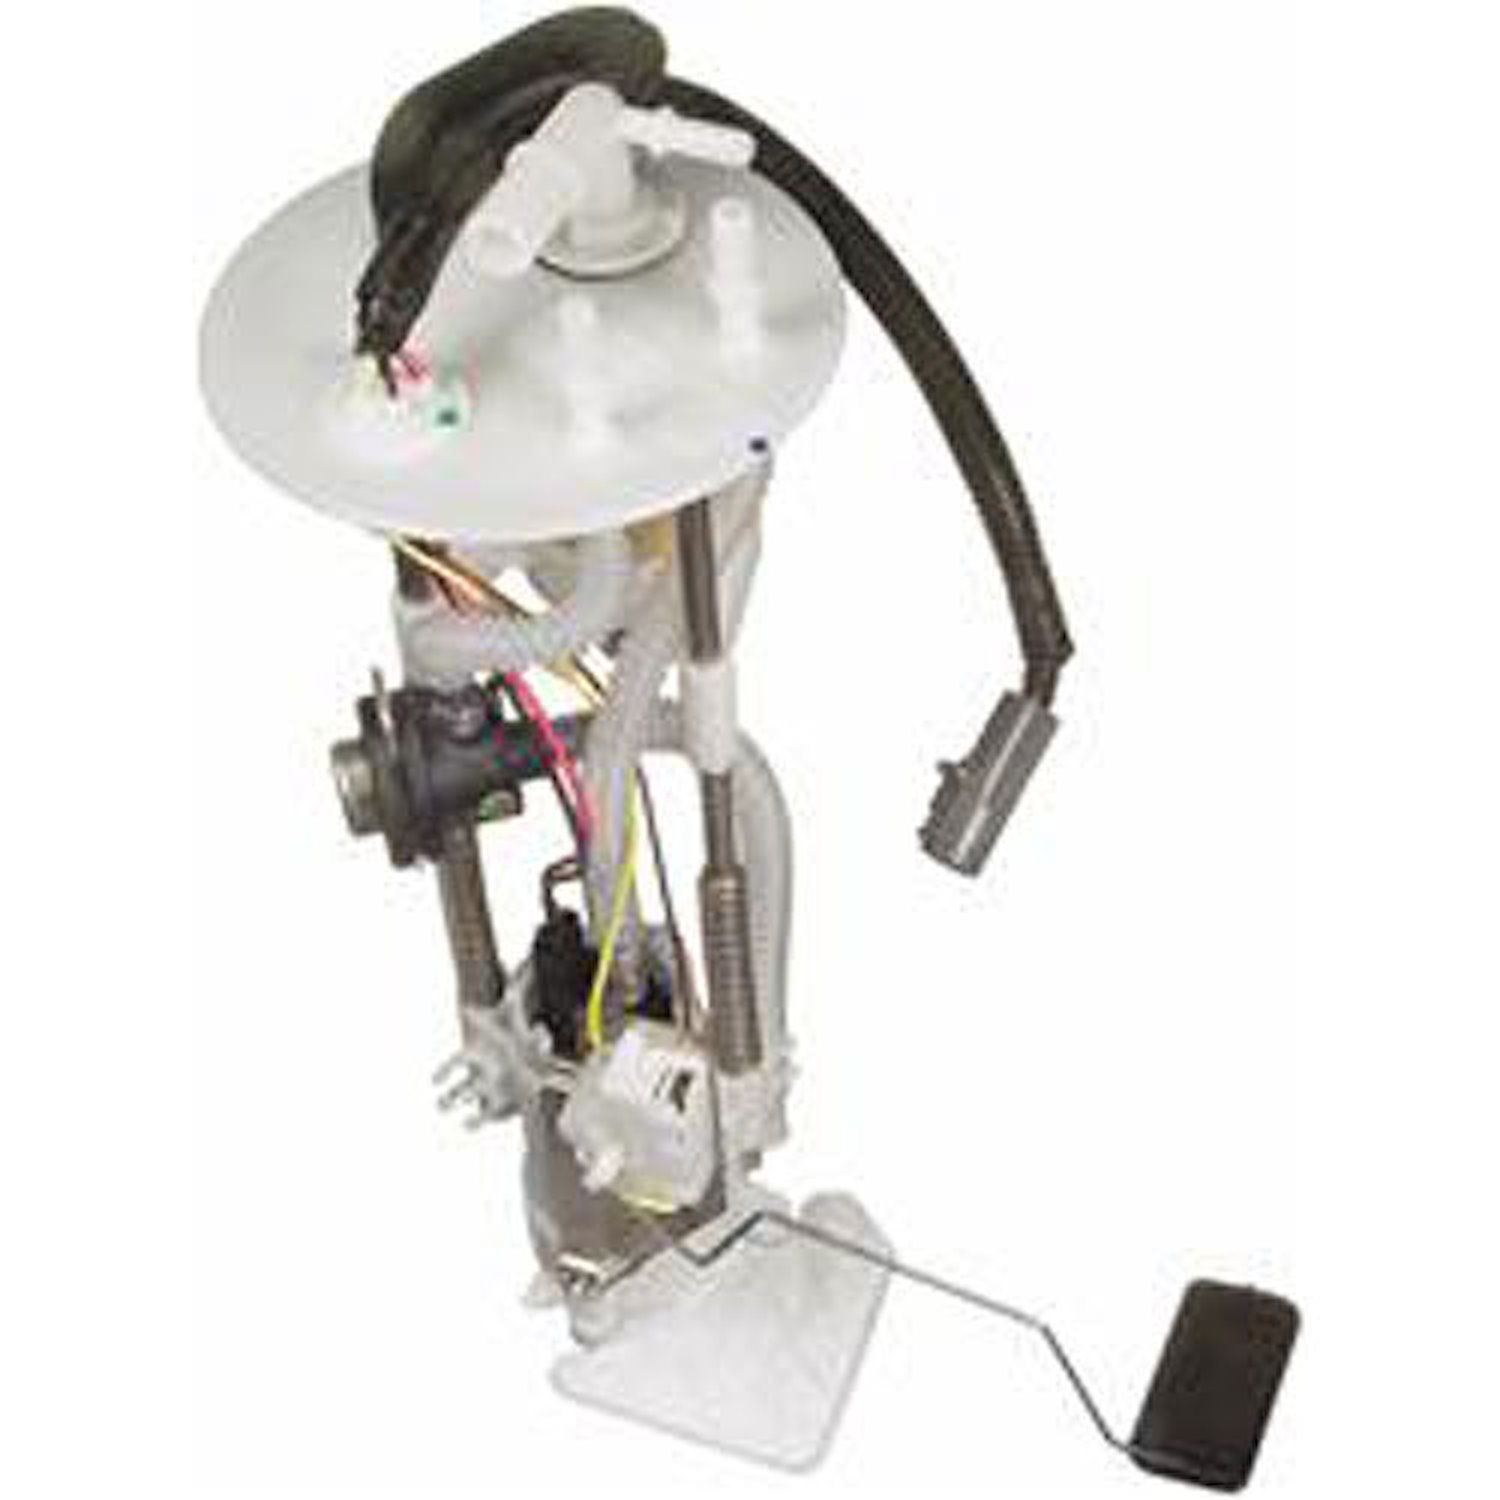 OE Ford Replacement Electric Fuel Pump Module Assembly 2001-03 Ford Ranger 2.3L 4 Cyl/3.0L/4.0L V6